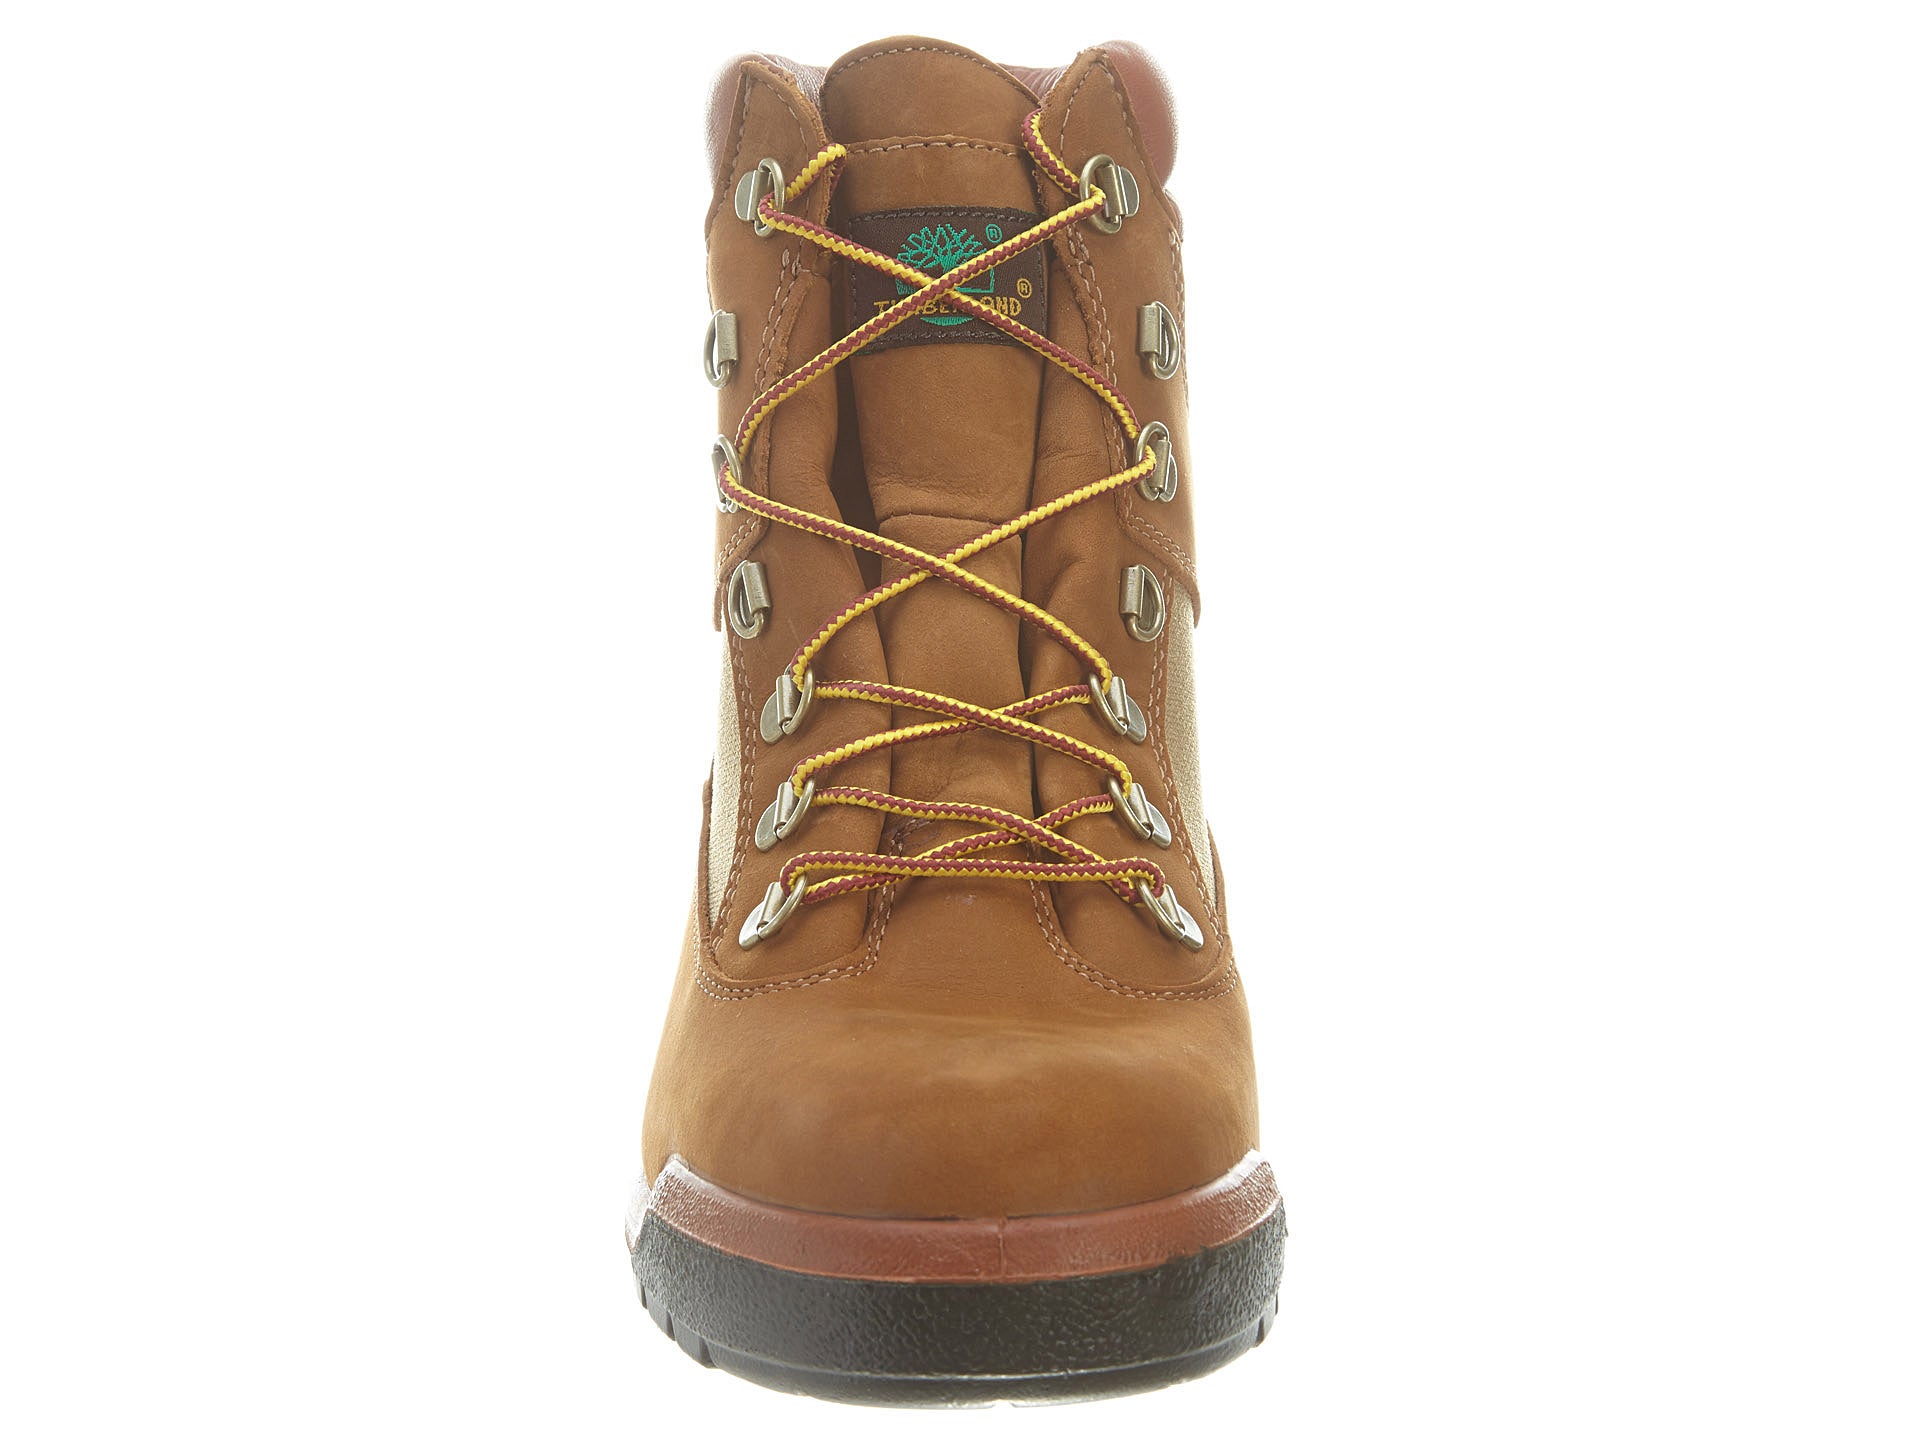 Timberland 6In Nongtx Fb  Men'S/Hommes Style 98519